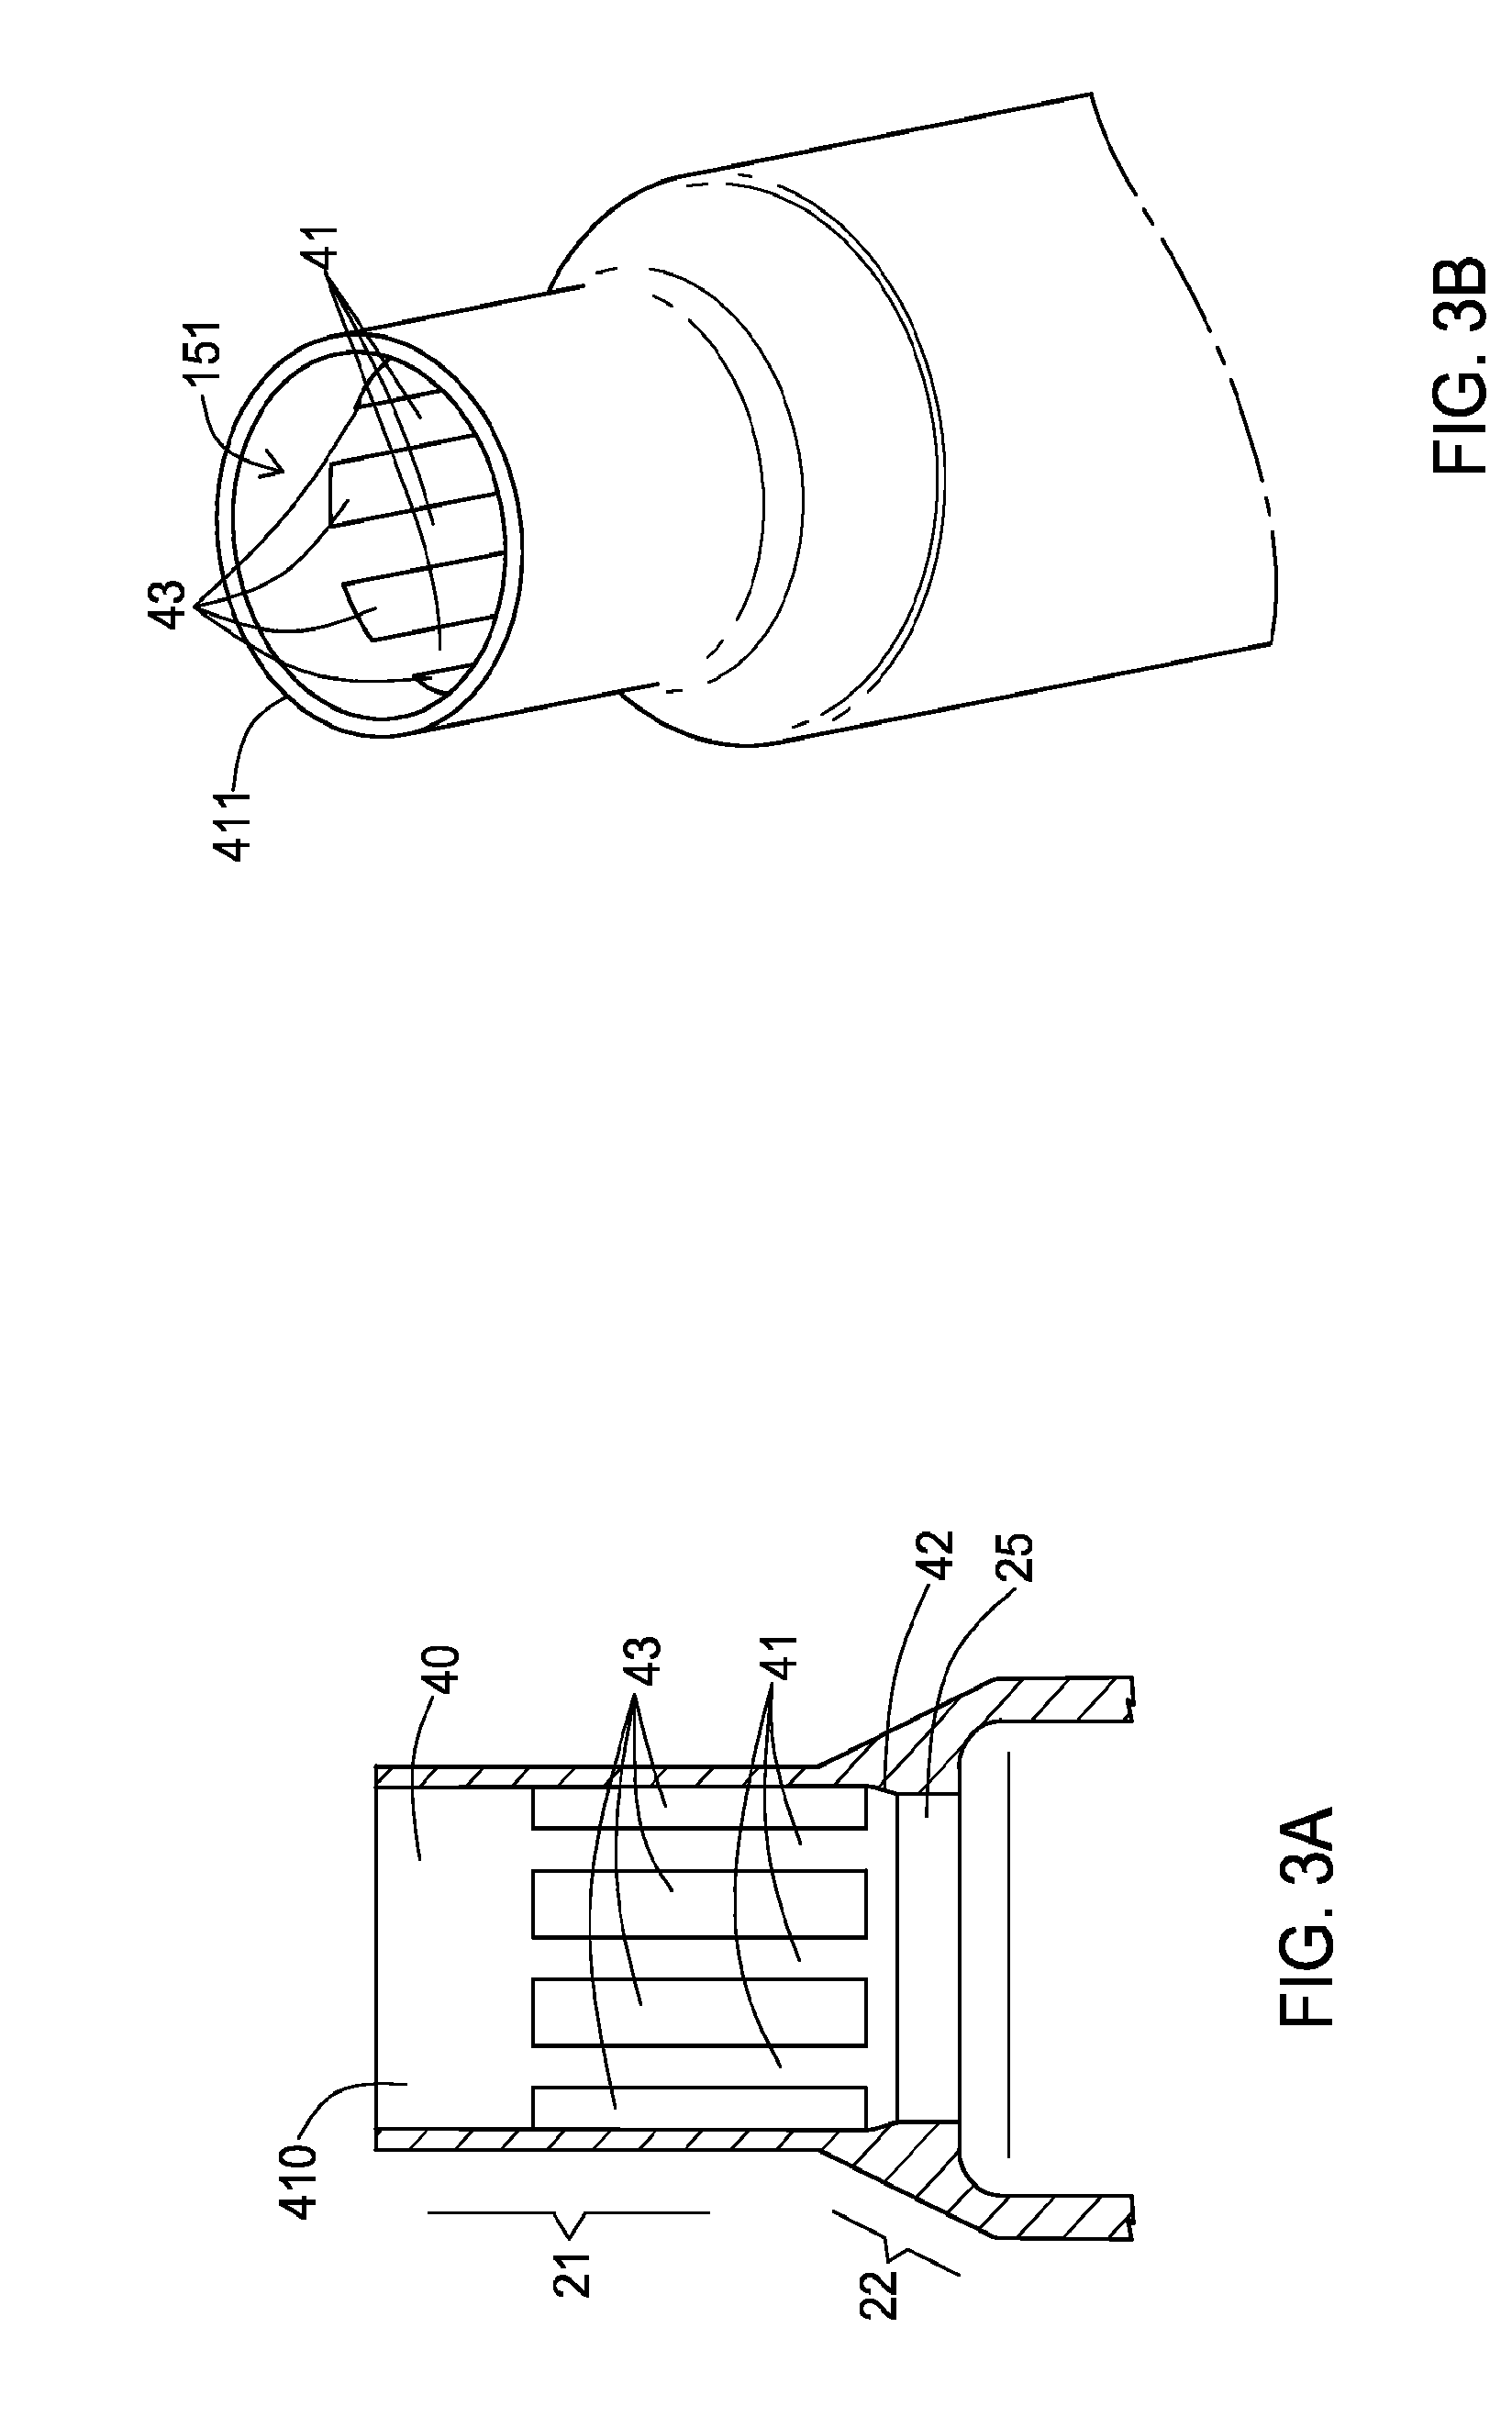 Methods and apparatus for making molded objects, and molded objects made therefrom